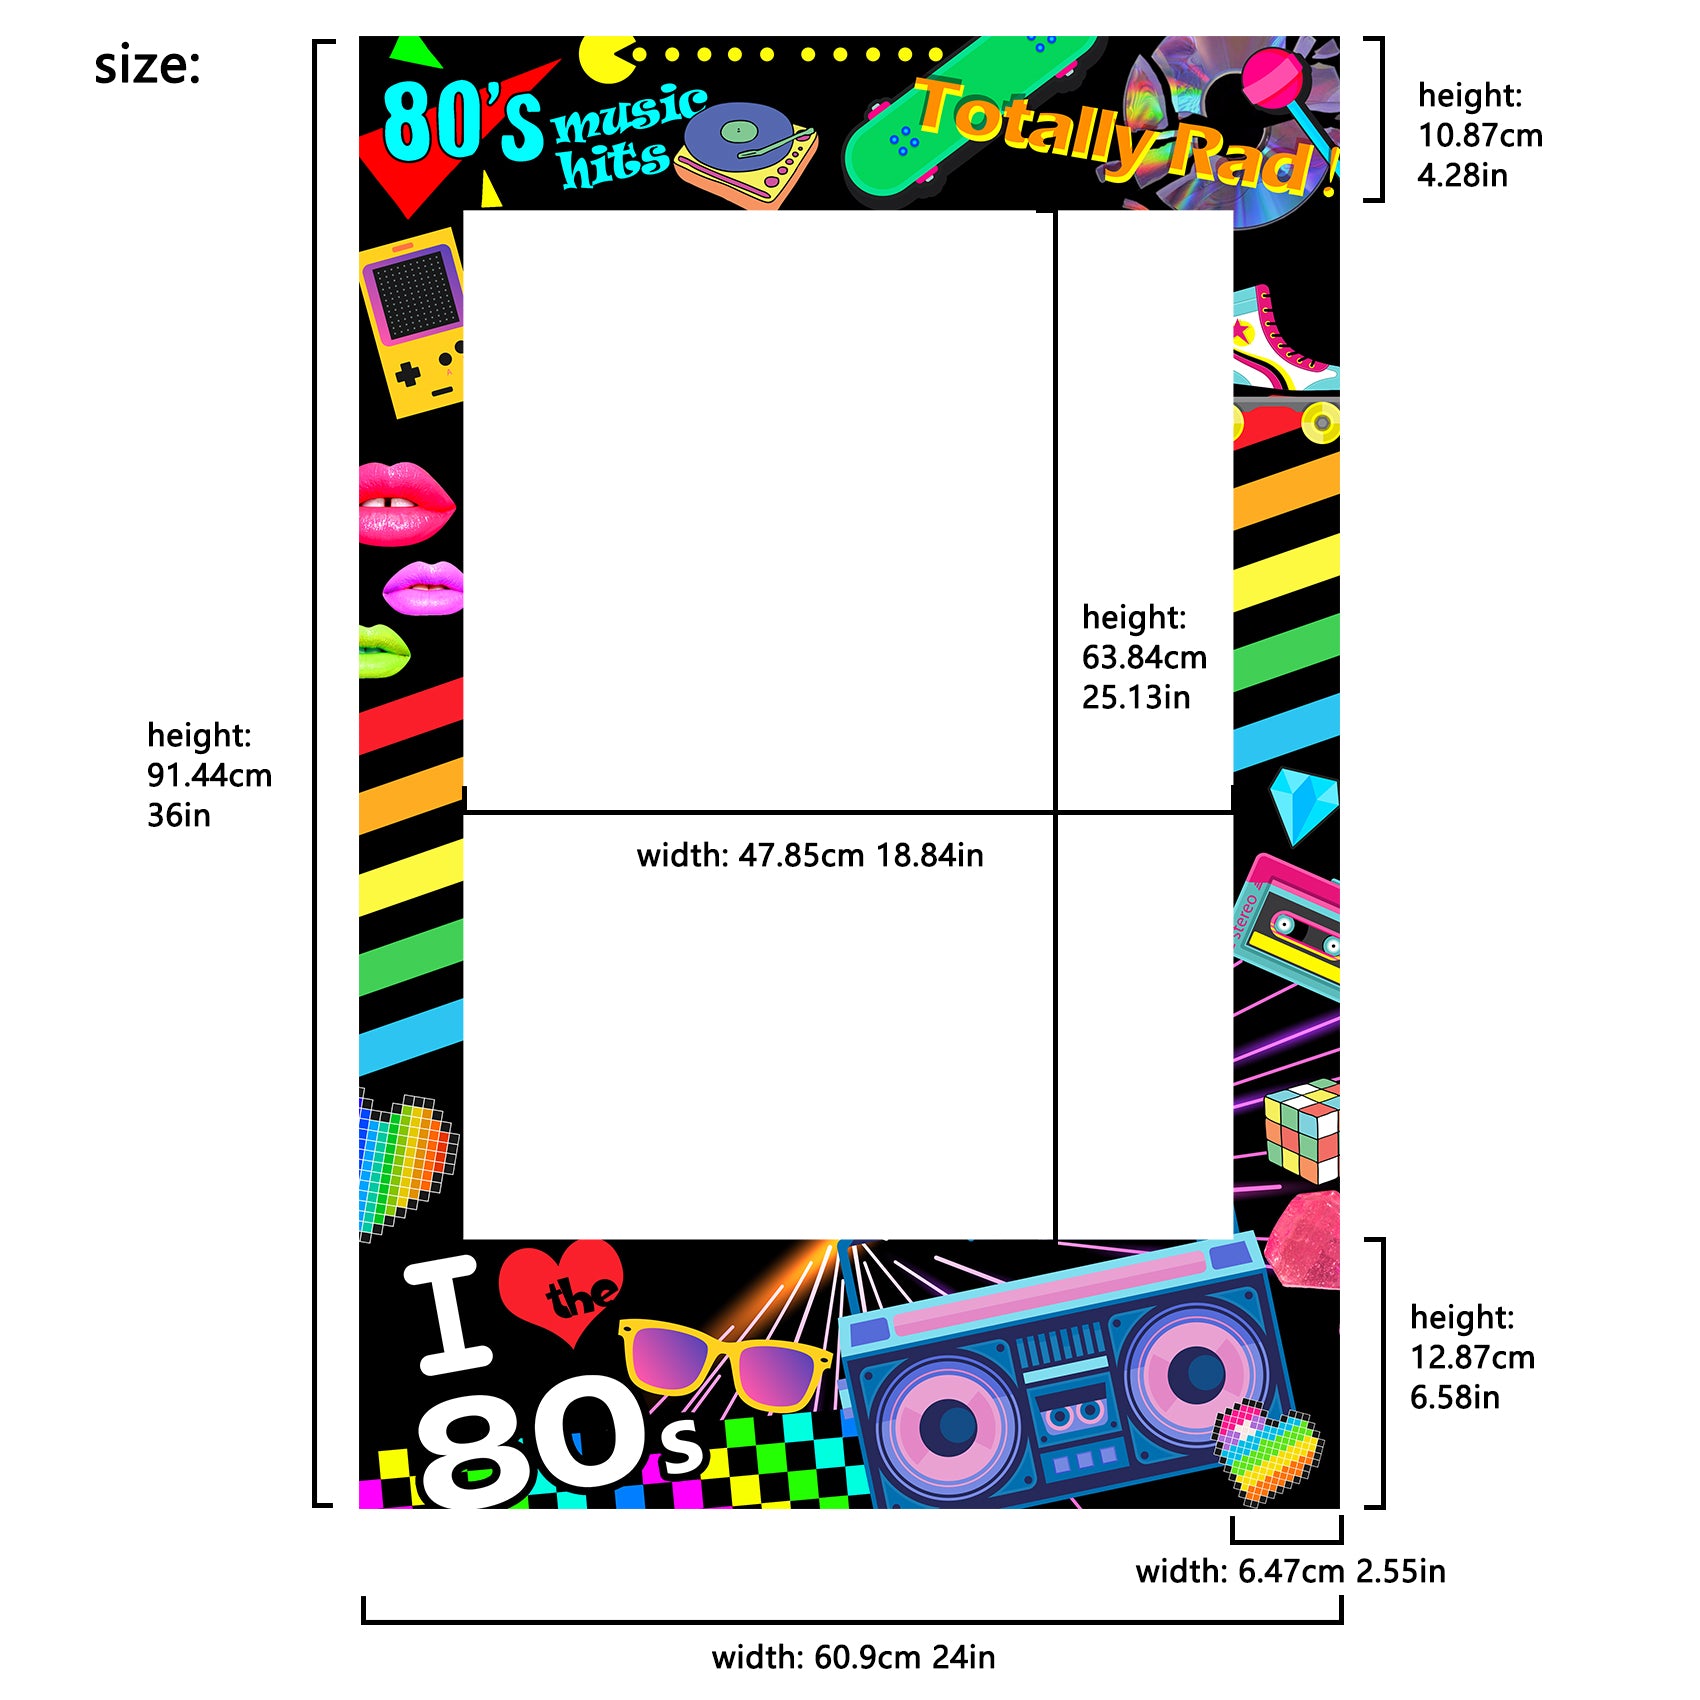 I love 80s Photo Booth Frame Photobooth Props Not Pre-cut for Easy Mounting by Self 36x24inch